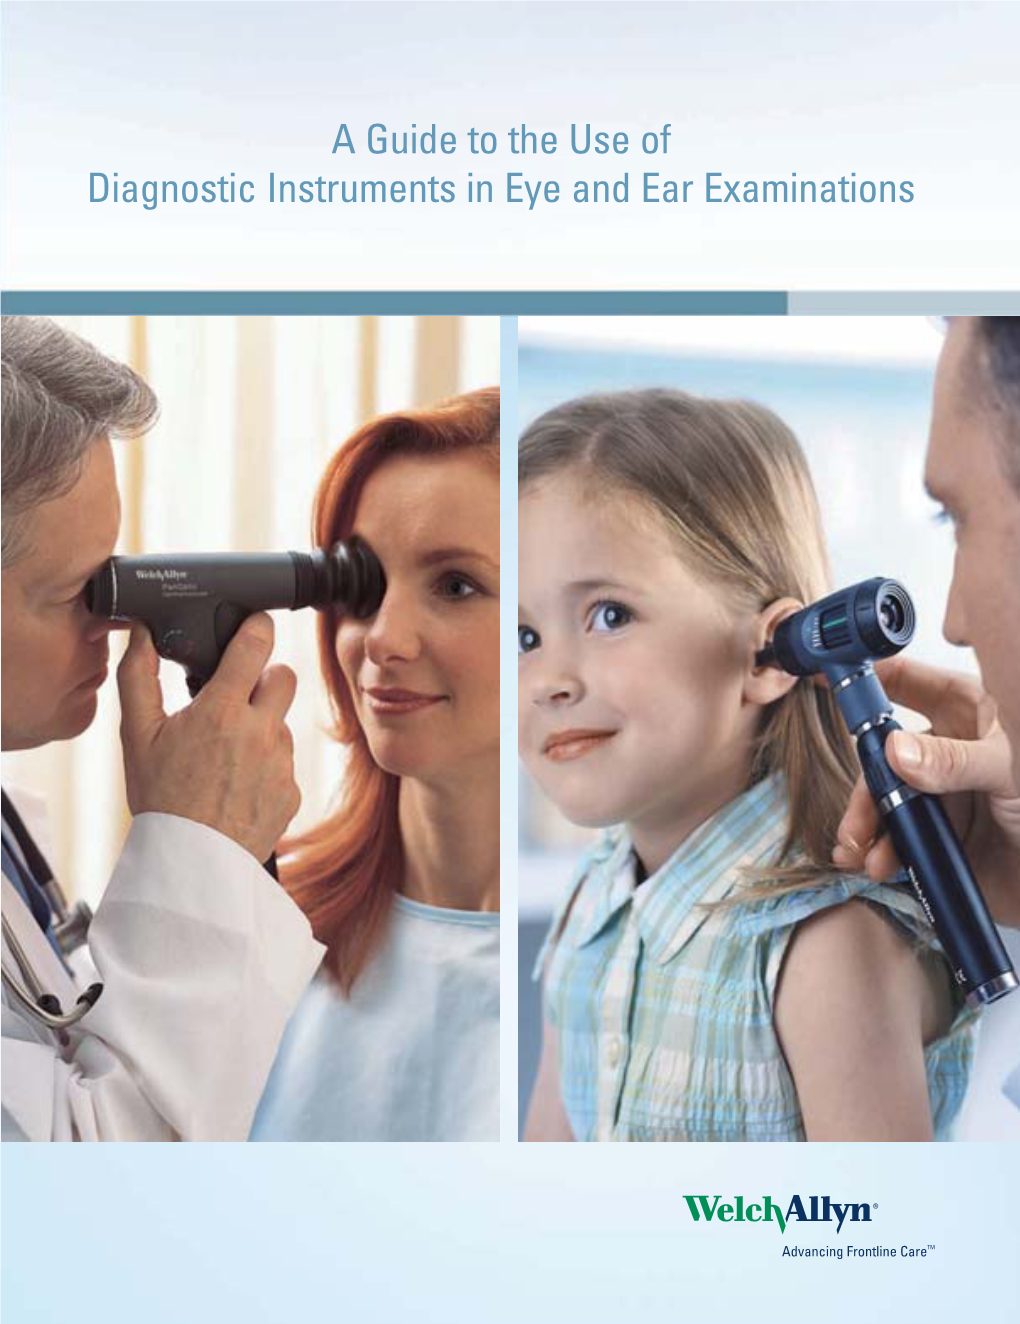 A Guide to the Use of Diagnostic Instruments in Eye and Ear Examinations Contents